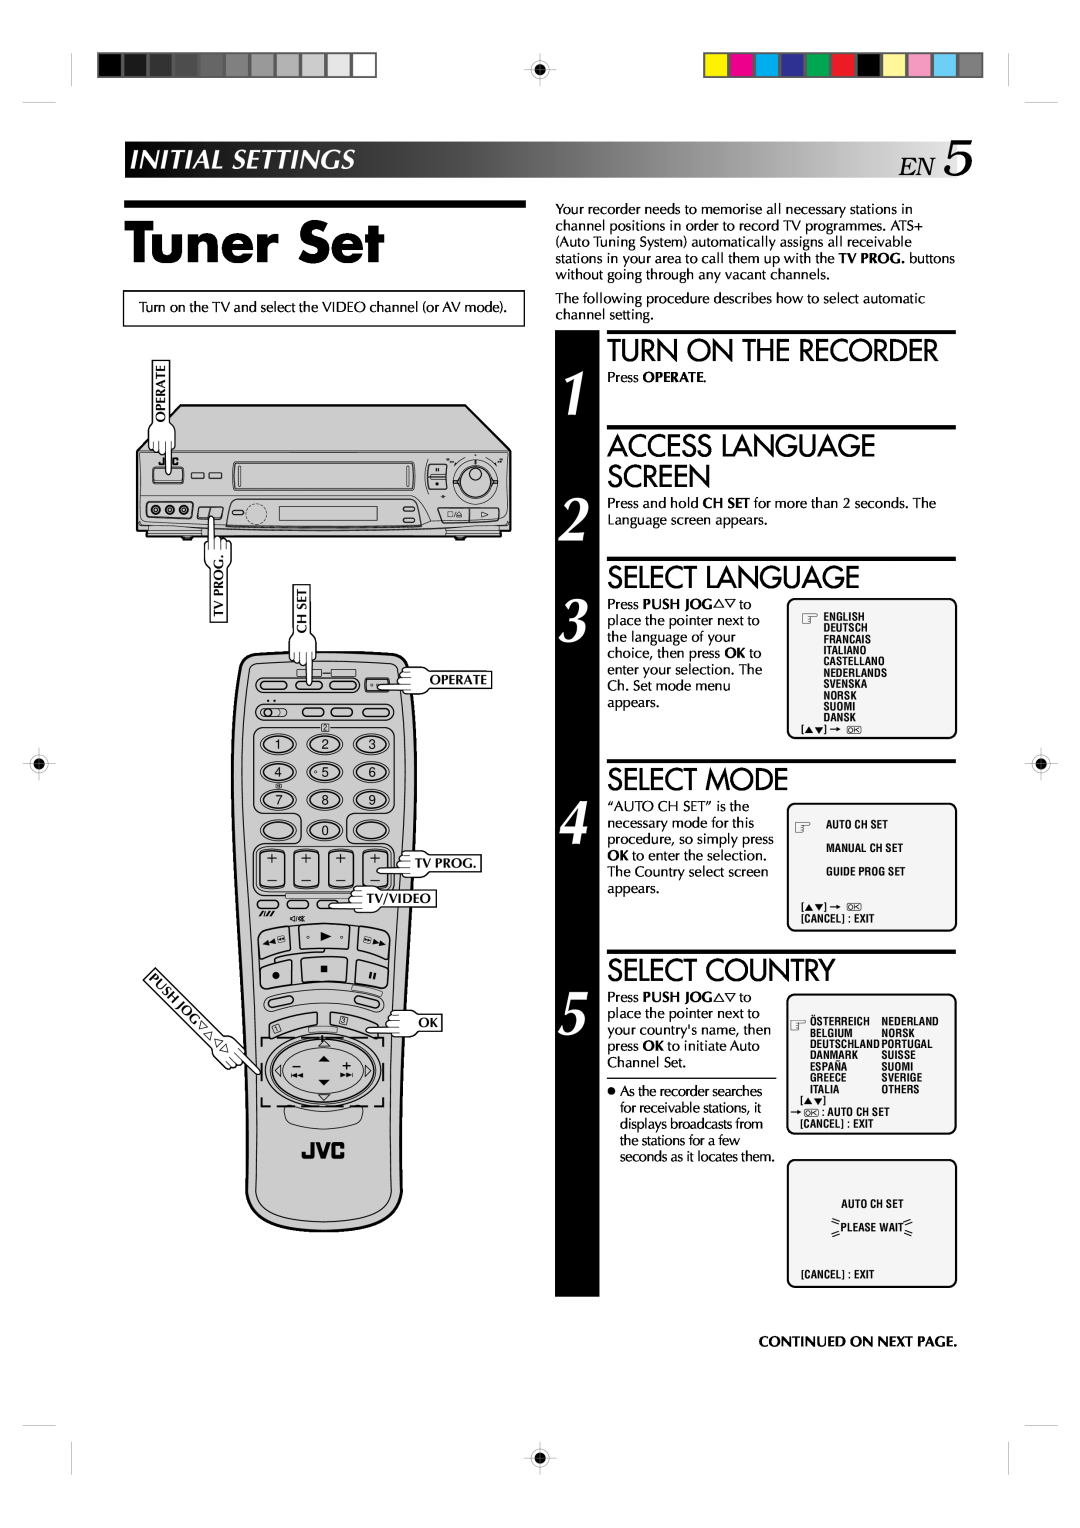 JVC HR-J638E/EH specifications Tuner Set, INITIALSETTINGSEN5, Access Language Screen, Select Mode, Continued On Next Page 